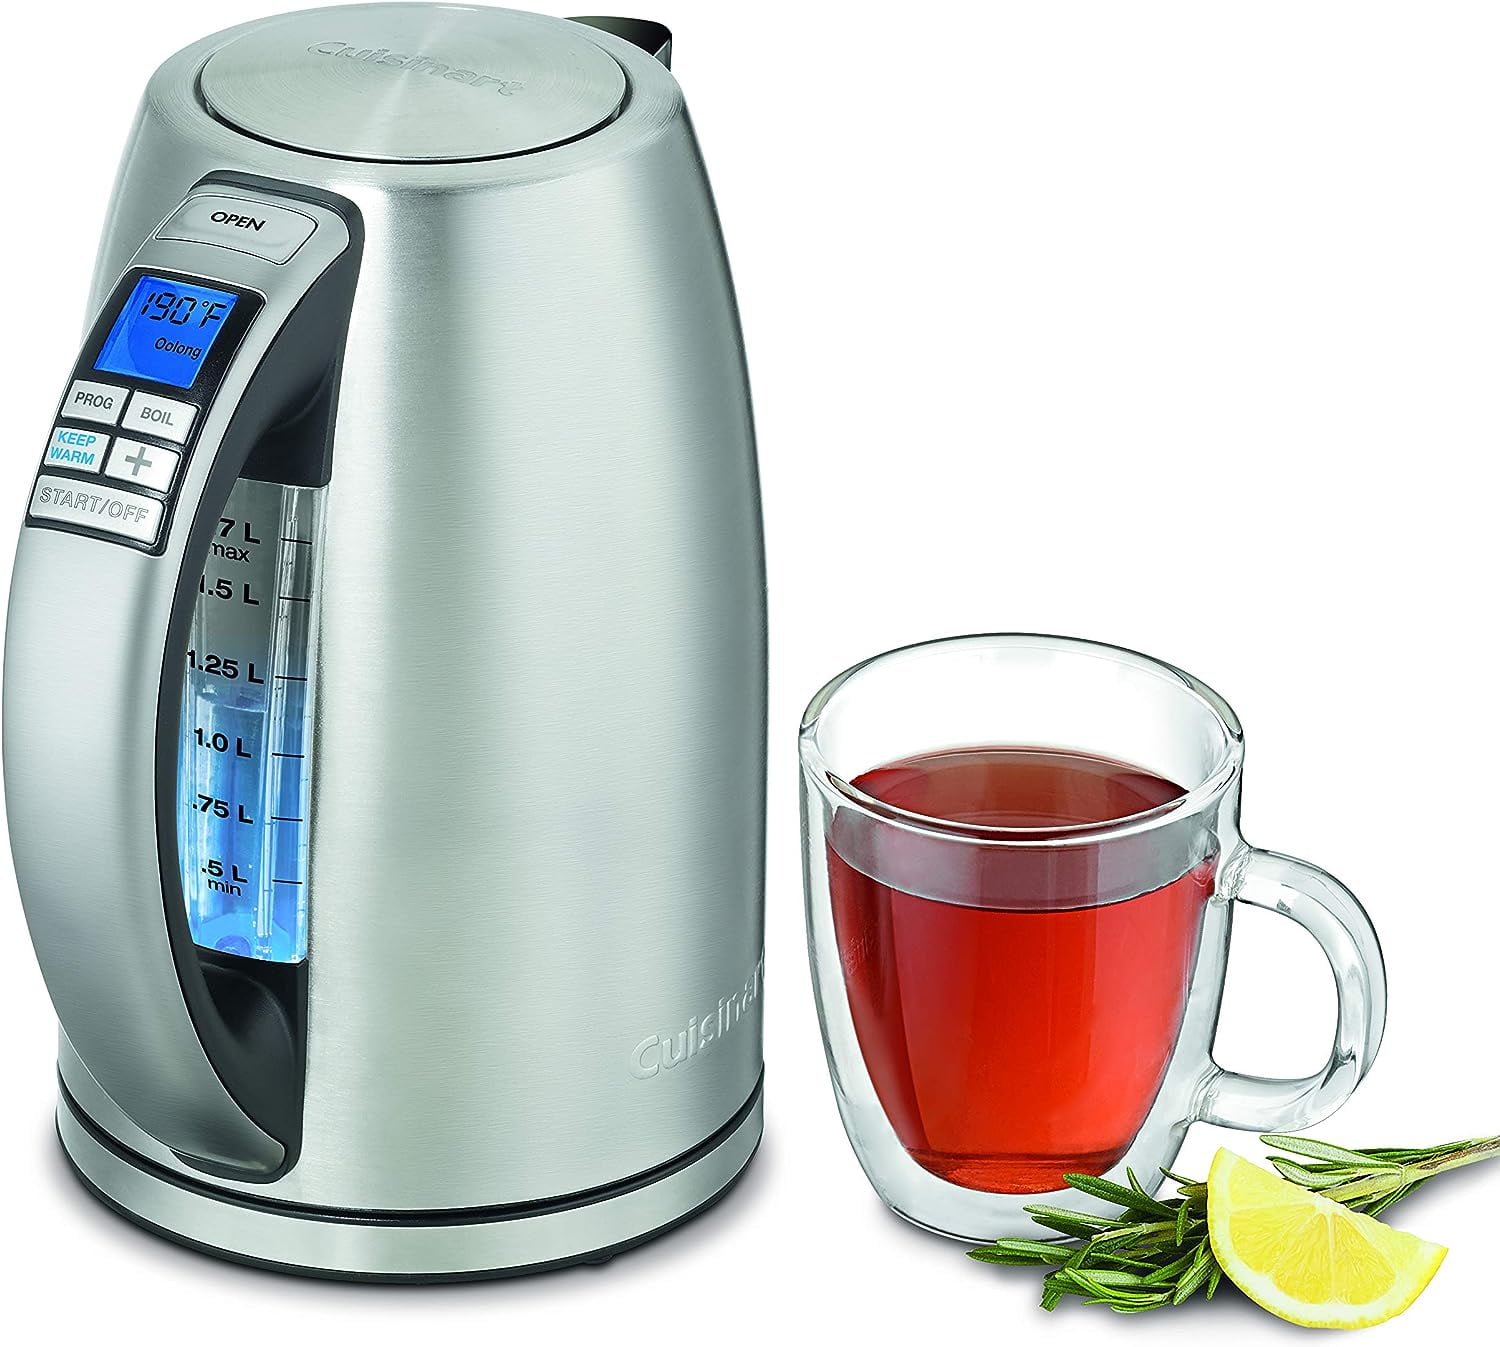 Cuisinart Cuisinart 1.7 Temperature Control Electric Kettle - Whisk